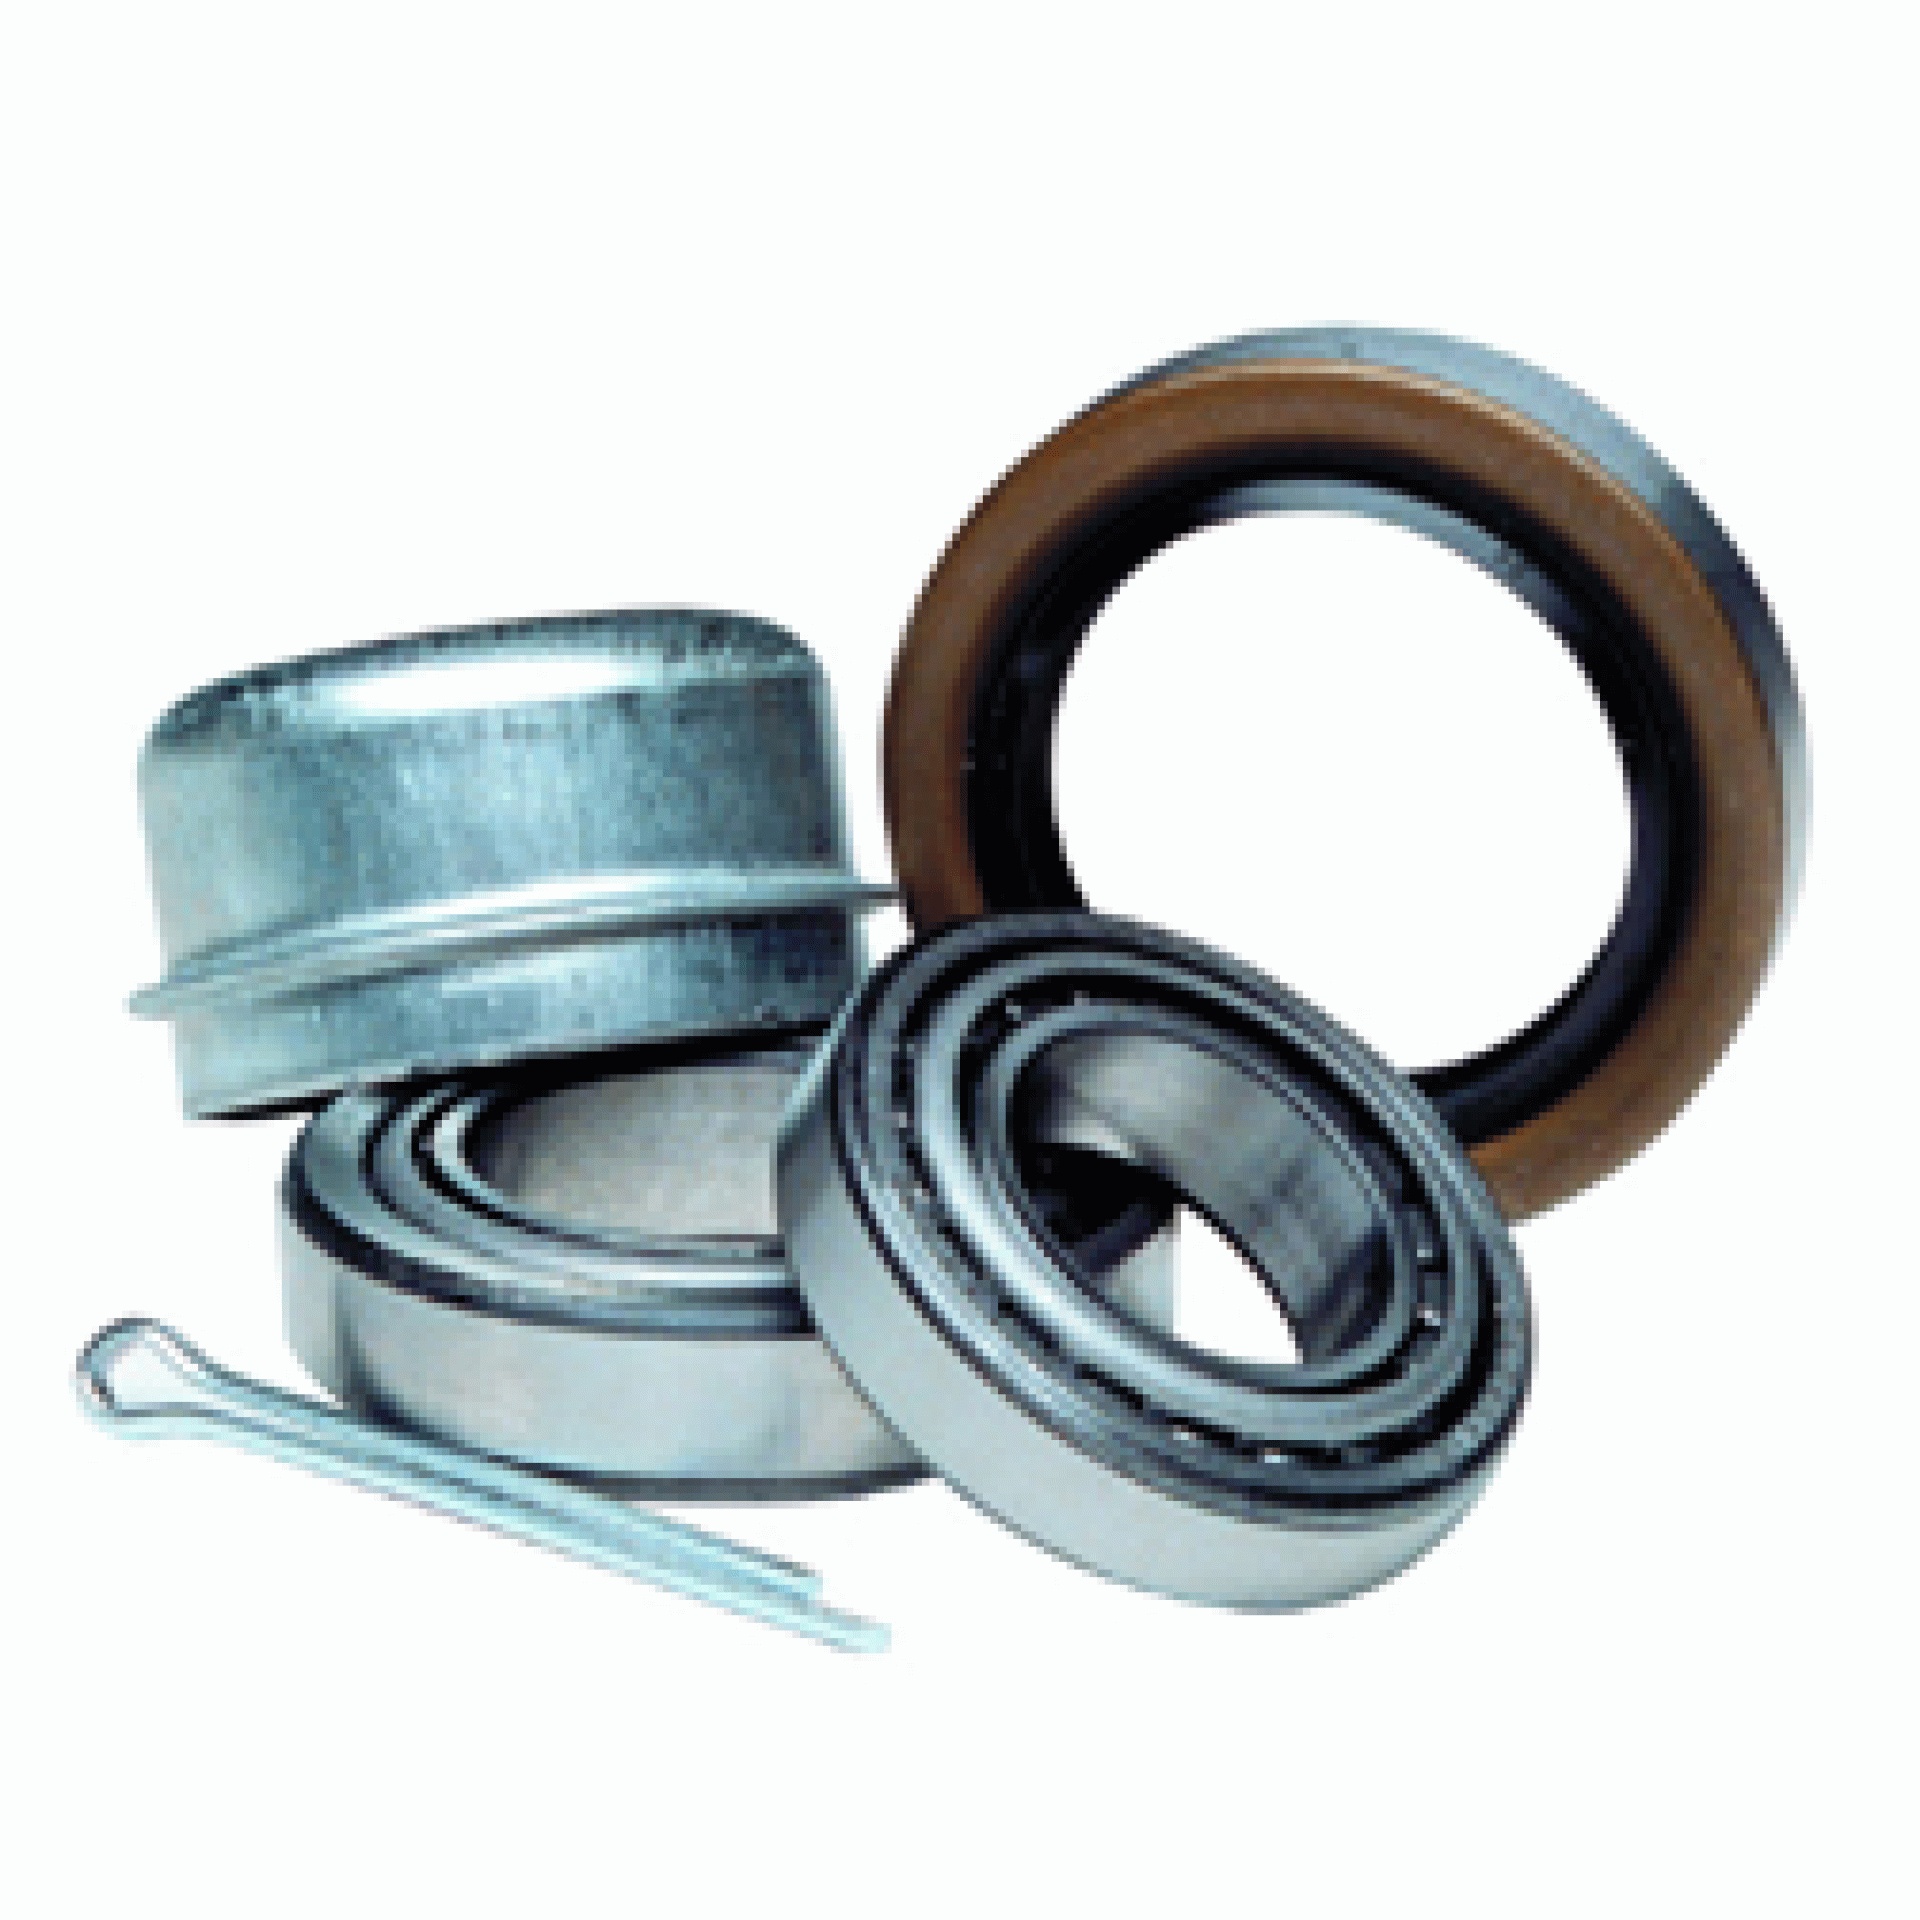 Dexter Marine | K71-G02-36 | Bearing Kit 1-1/4 Inch Straight Spindle With Dust Cap